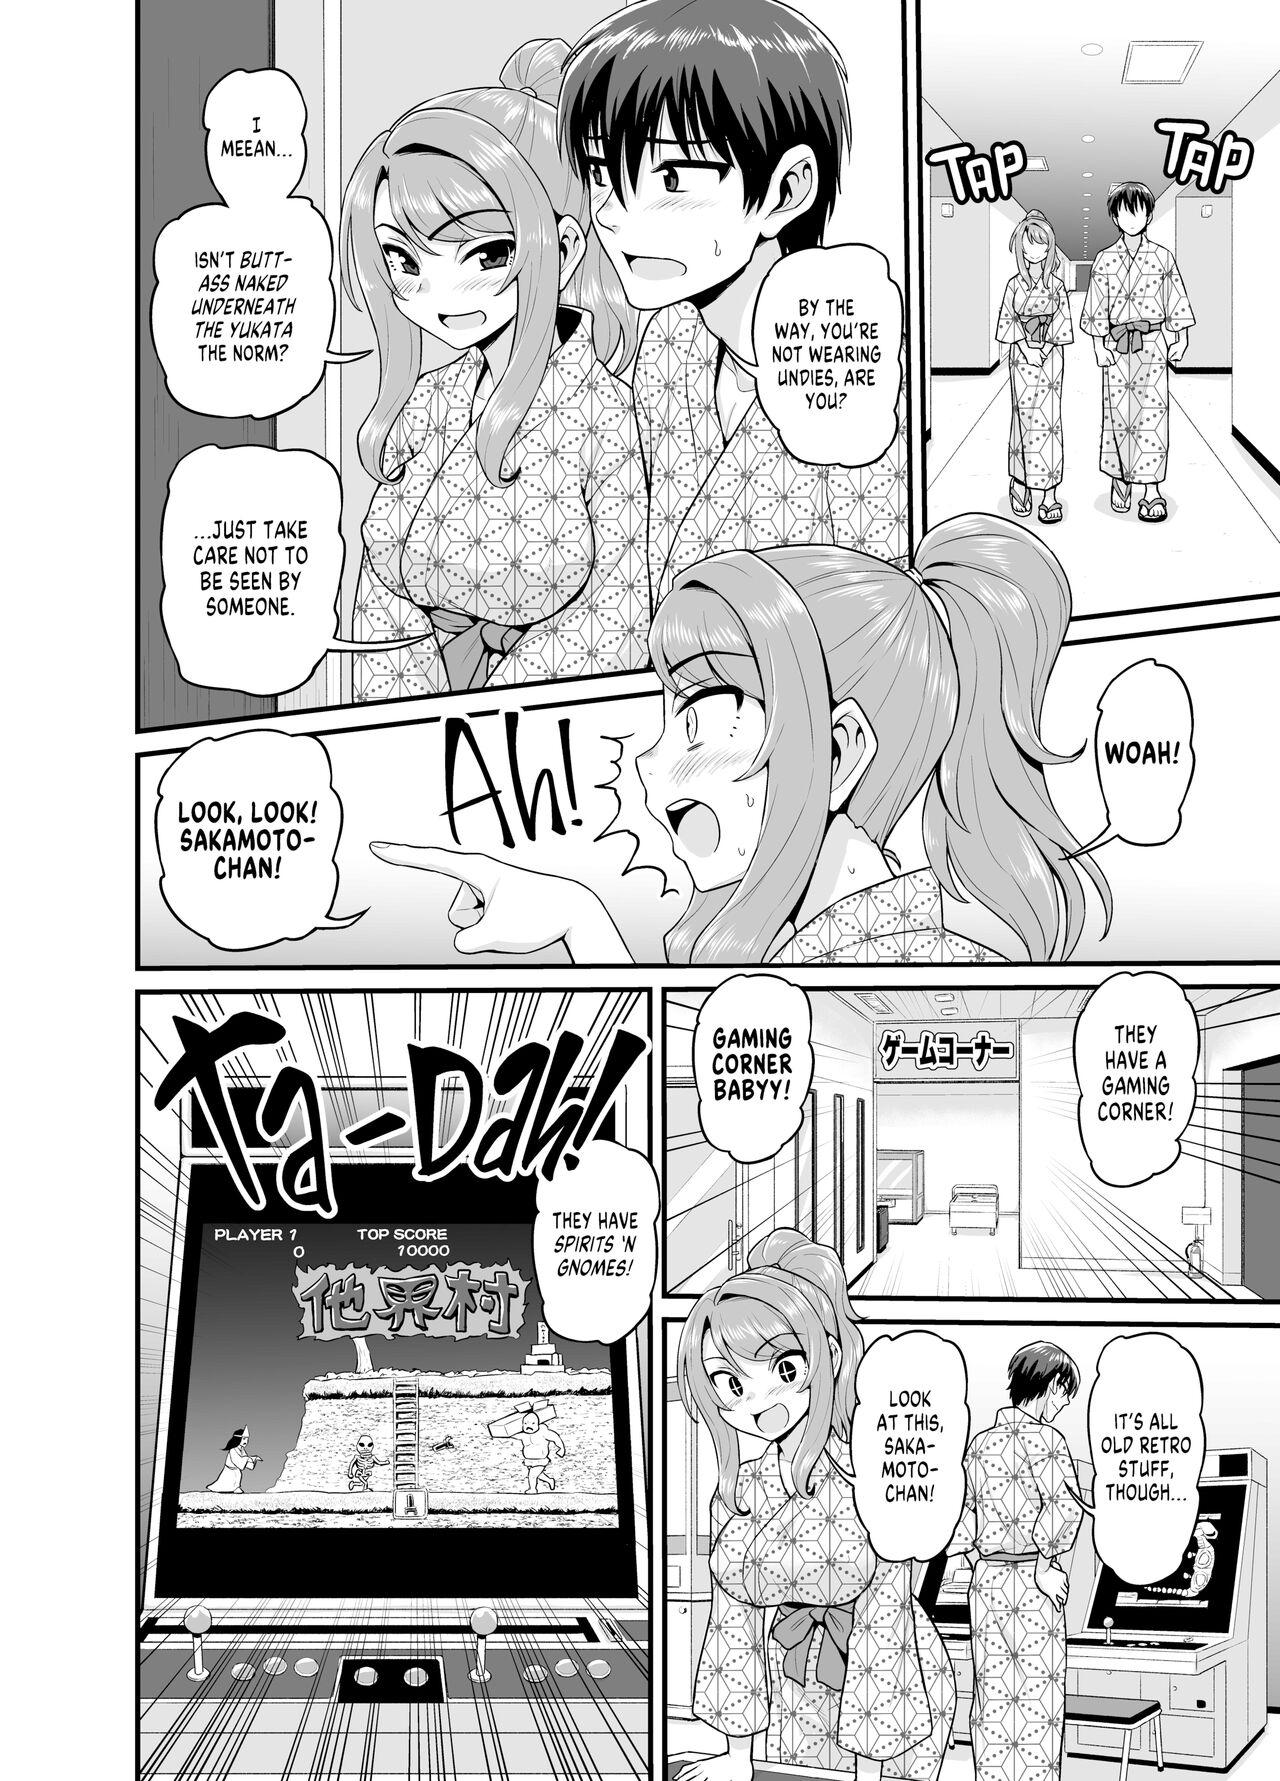 Chudai Getting it On With Your Gaming Buddy at the Hot Spring NTRVer. - Original Female Orgasm - Page 9